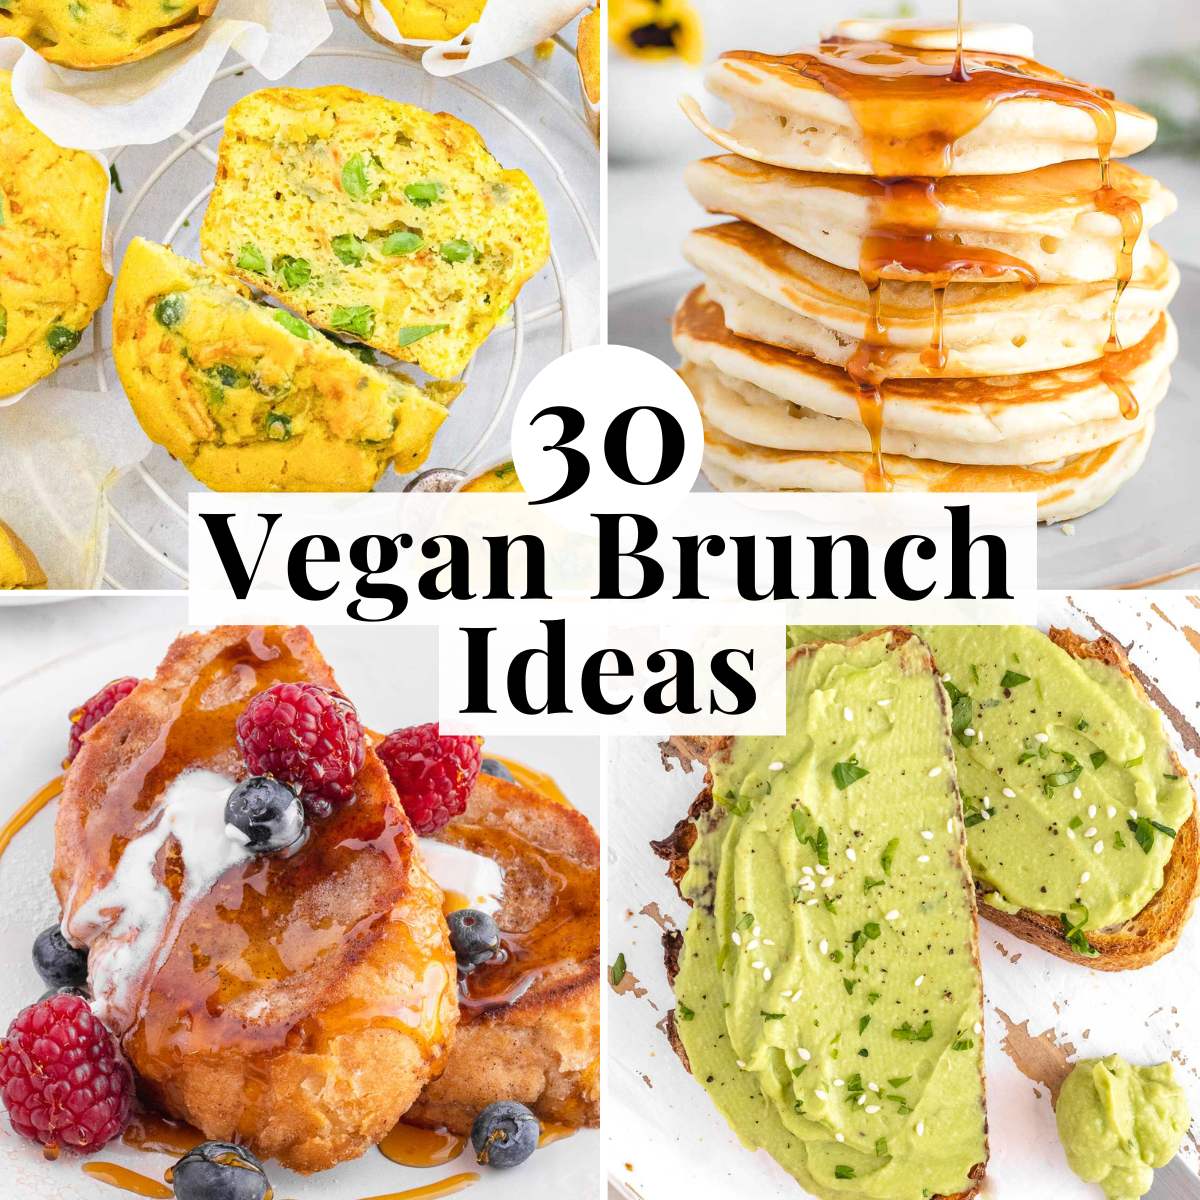 Vegan brunch recipes with French toast, pancakes and muffins